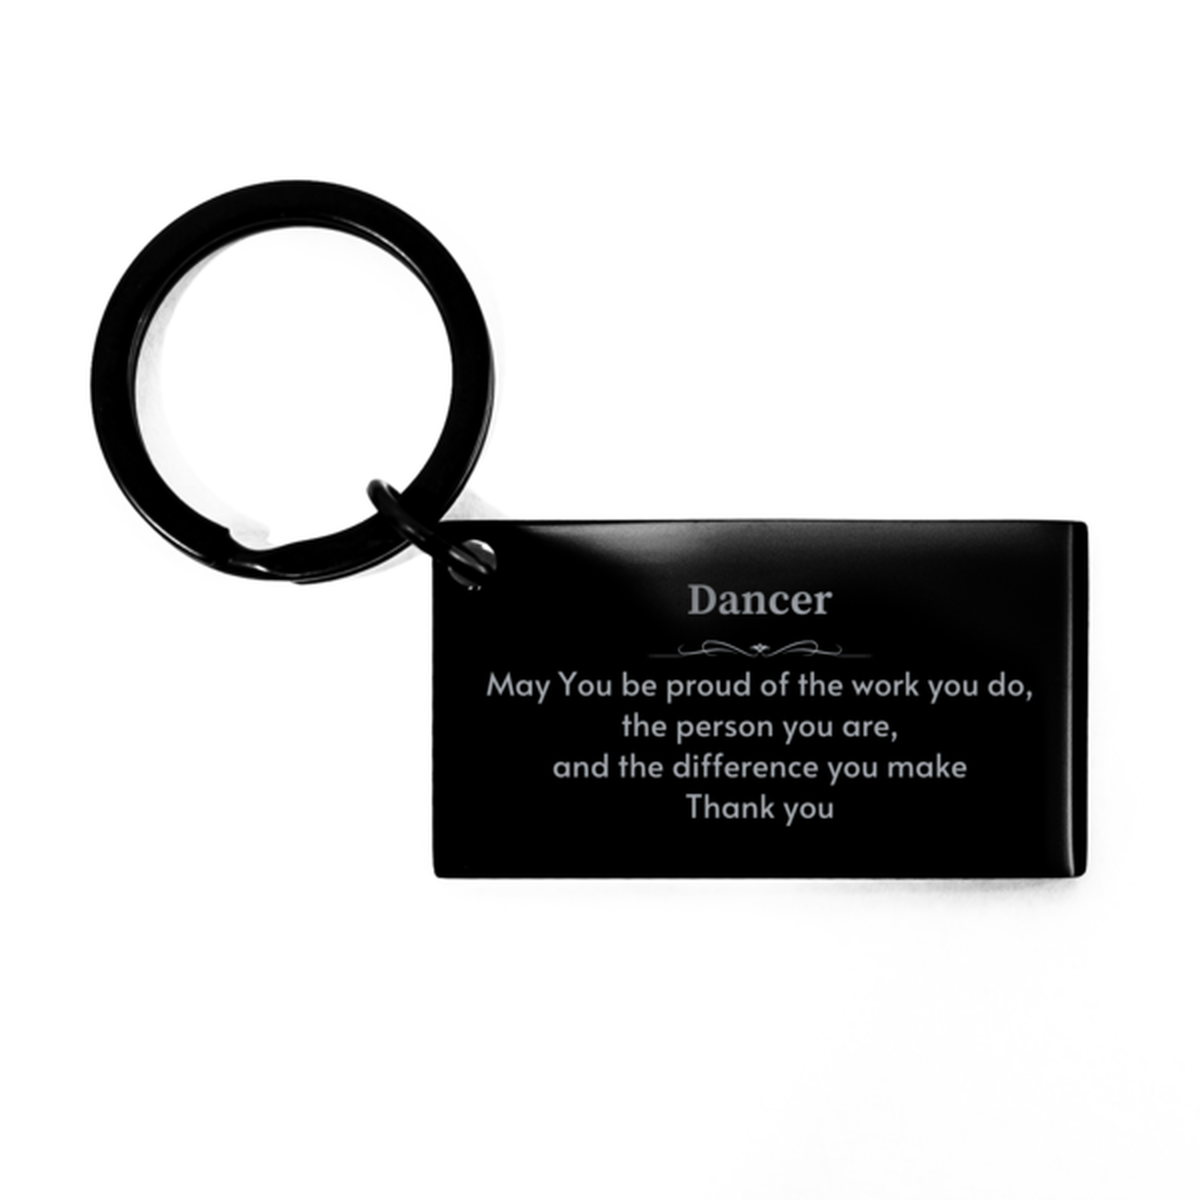 Heartwarming Keychain Retirement Coworkers Gifts for Dancer, Forester May You be proud of the work you do, the person you are Gifts for Boss Men Women Friends